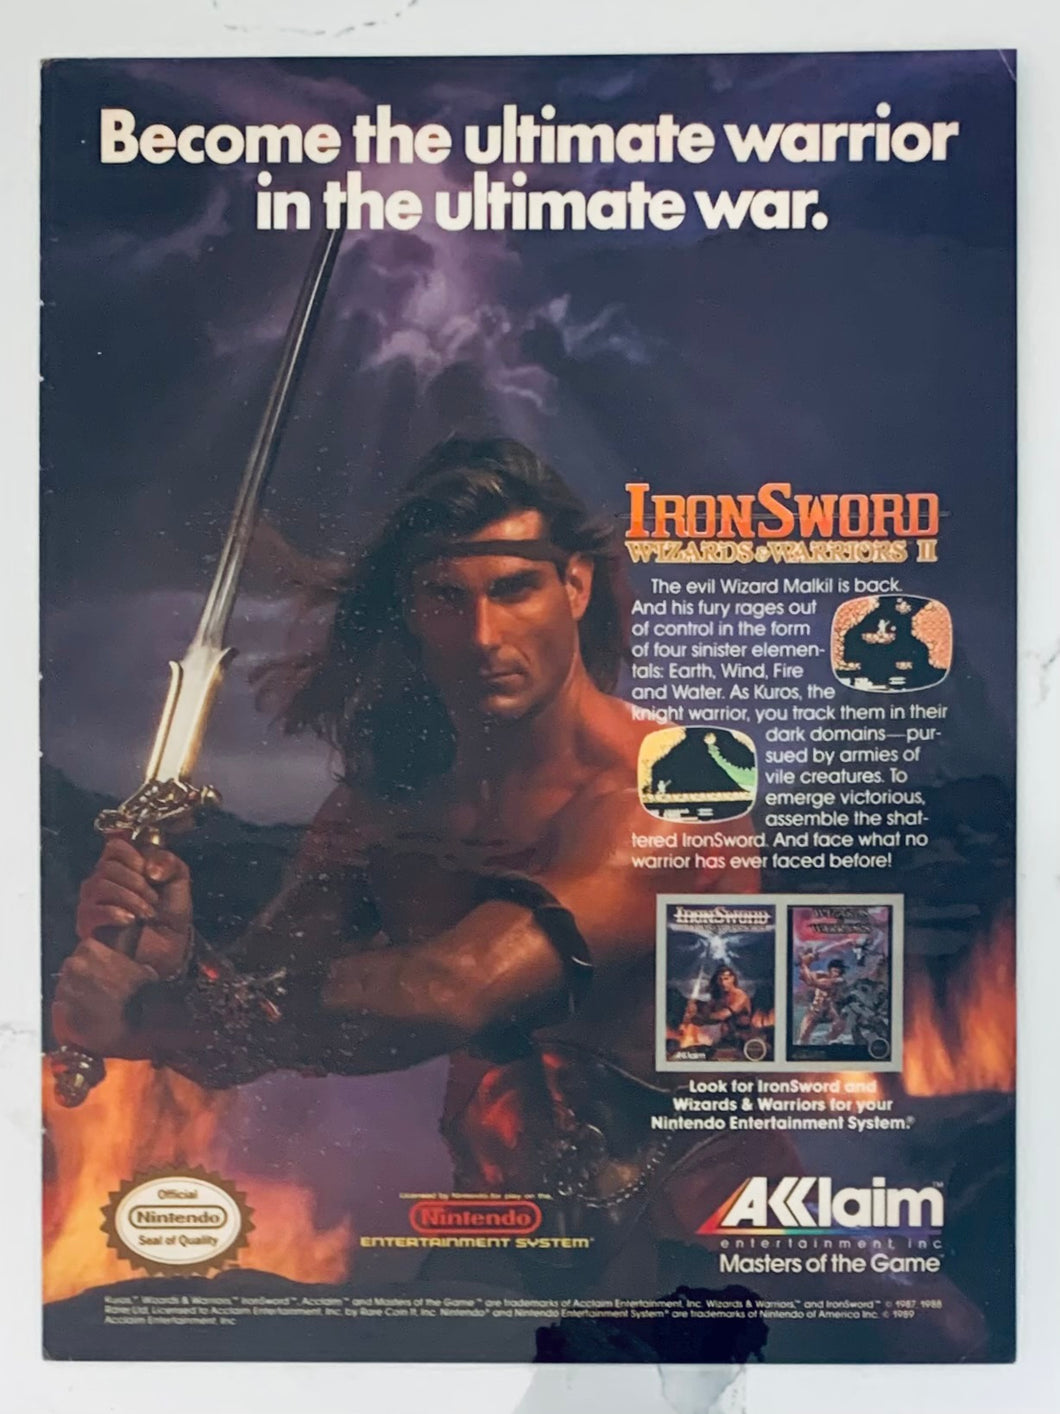 IronSword: Wizards & Warriors II - NES - Original Vintage Advertisement - Print Ads - Laminated A4 Poster